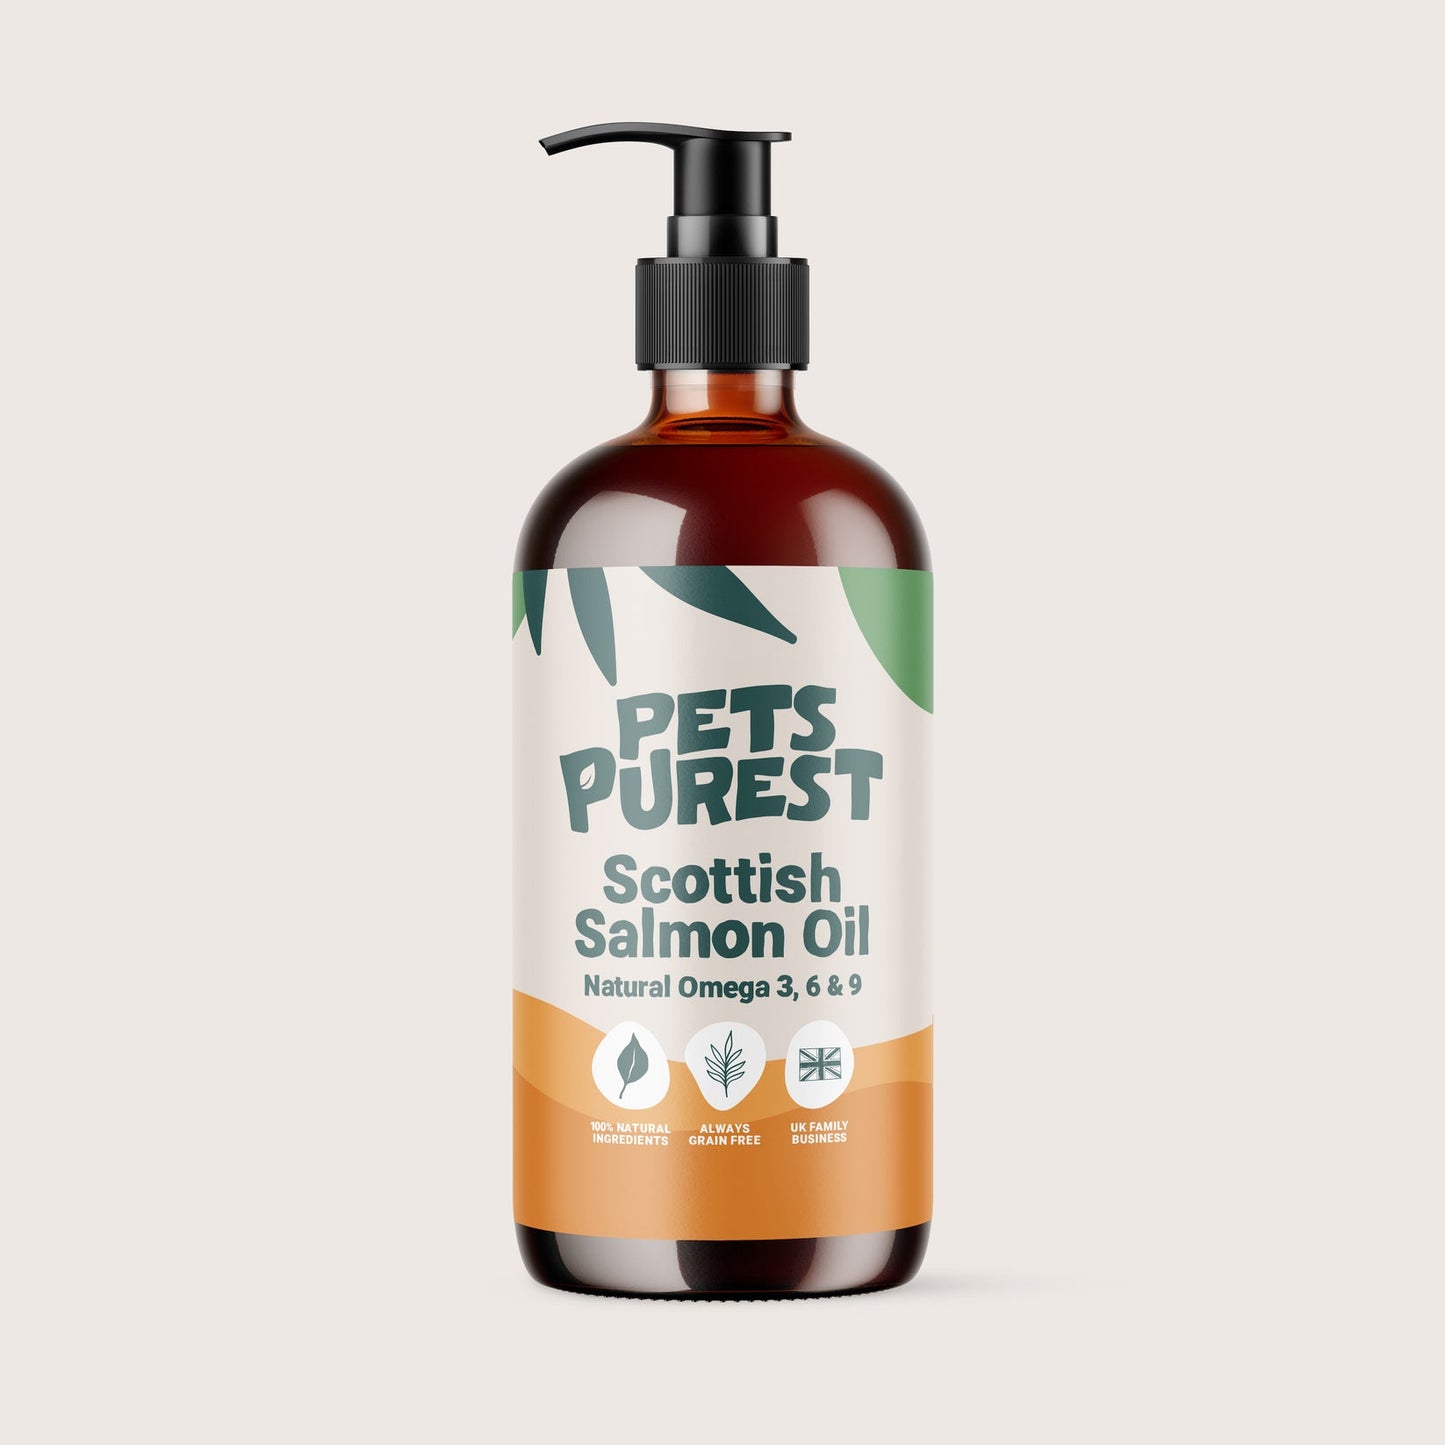 Pets Purest Natural Scottish Salmon Oil for Cats and Dogs